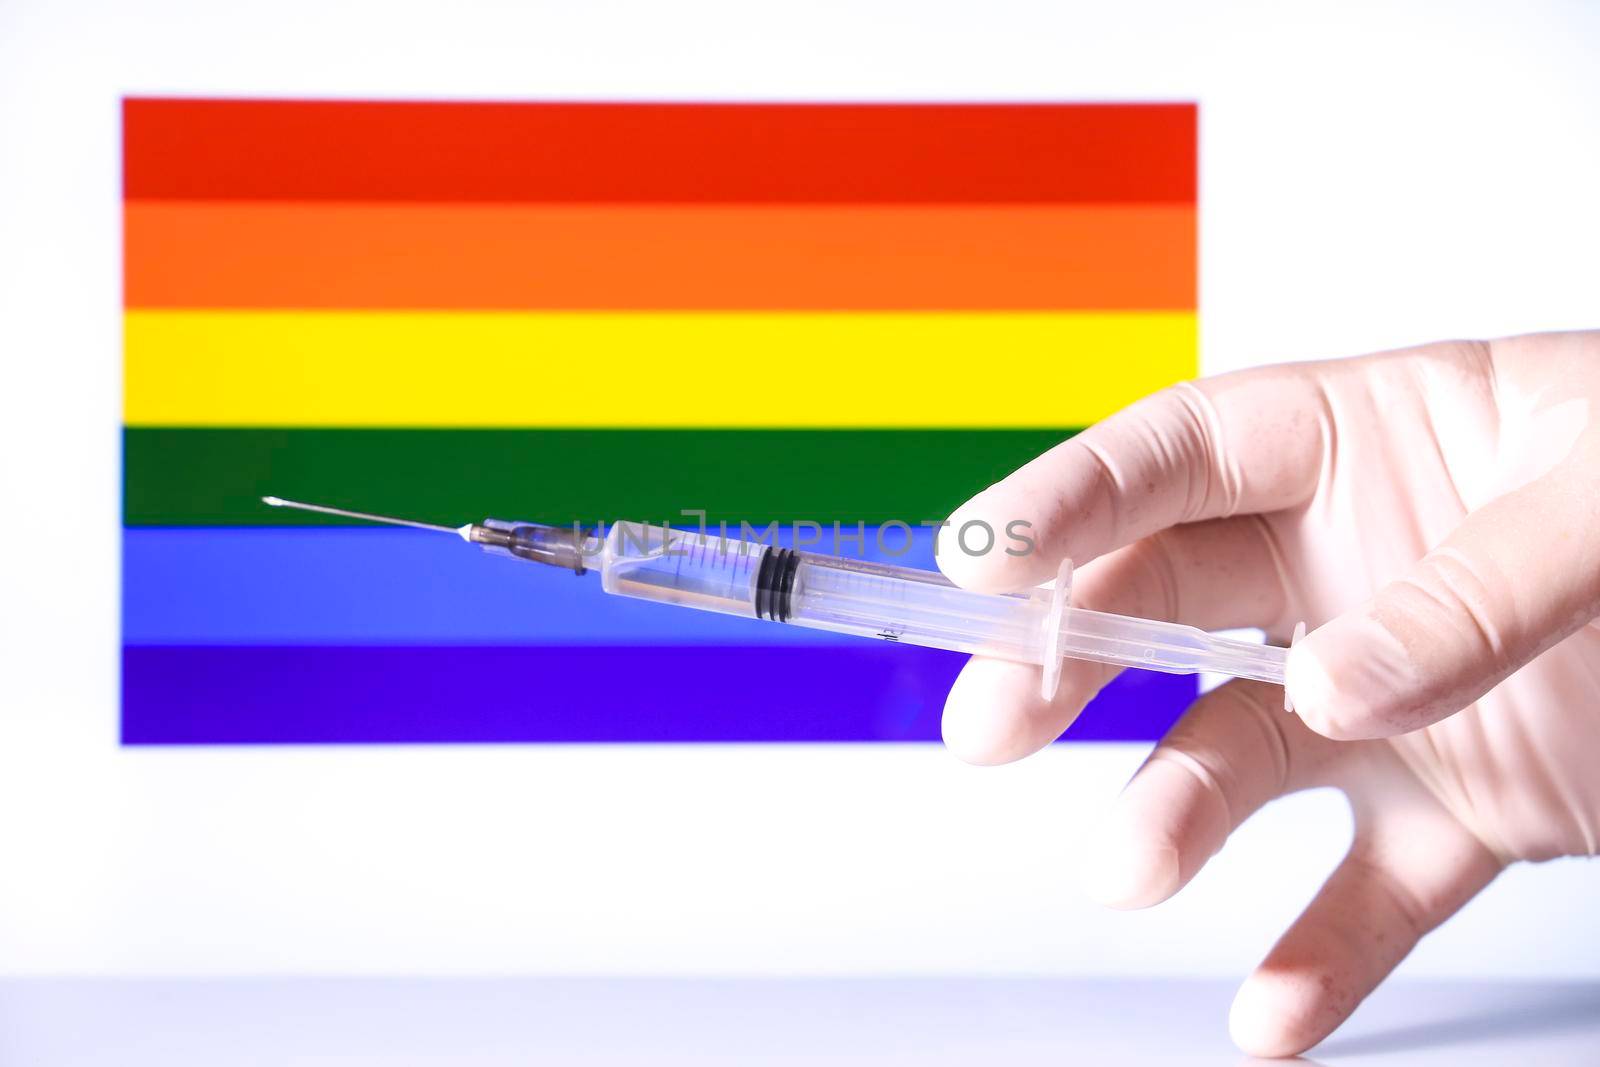 Hand in surgical glove holding syringe and rainbow flag in the background